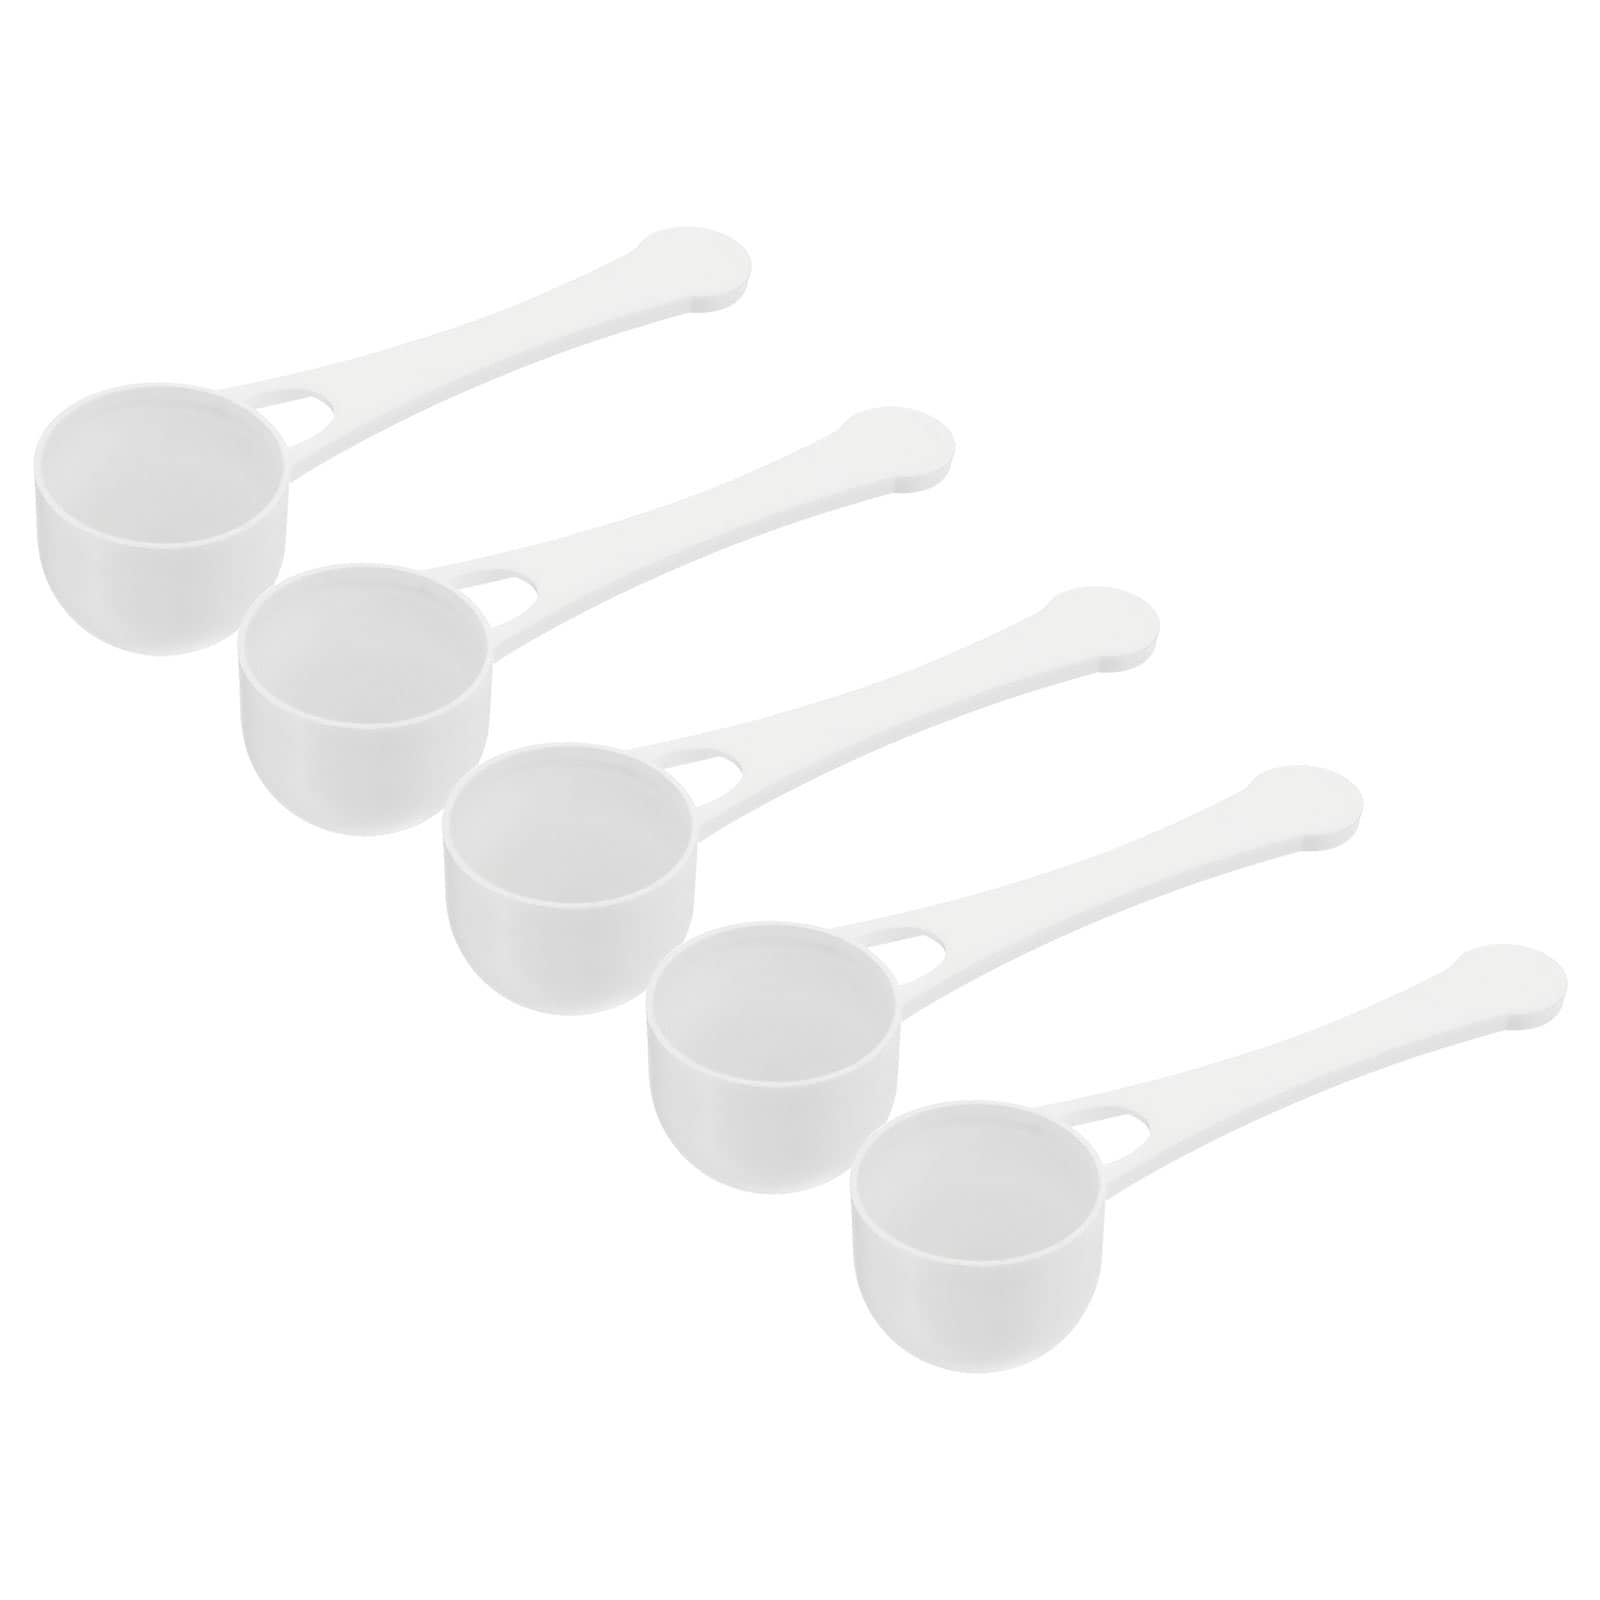 https://ak1.ostkcdn.com/images/products/is/images/direct/b7b71e3df44ec8a2a00fcc68237eb2bd618c9da5/Micro-Spoons-5-Gram-Measuring-Scoop-Plastic-Round-Bottom-with-Hole-30Pcs.jpg